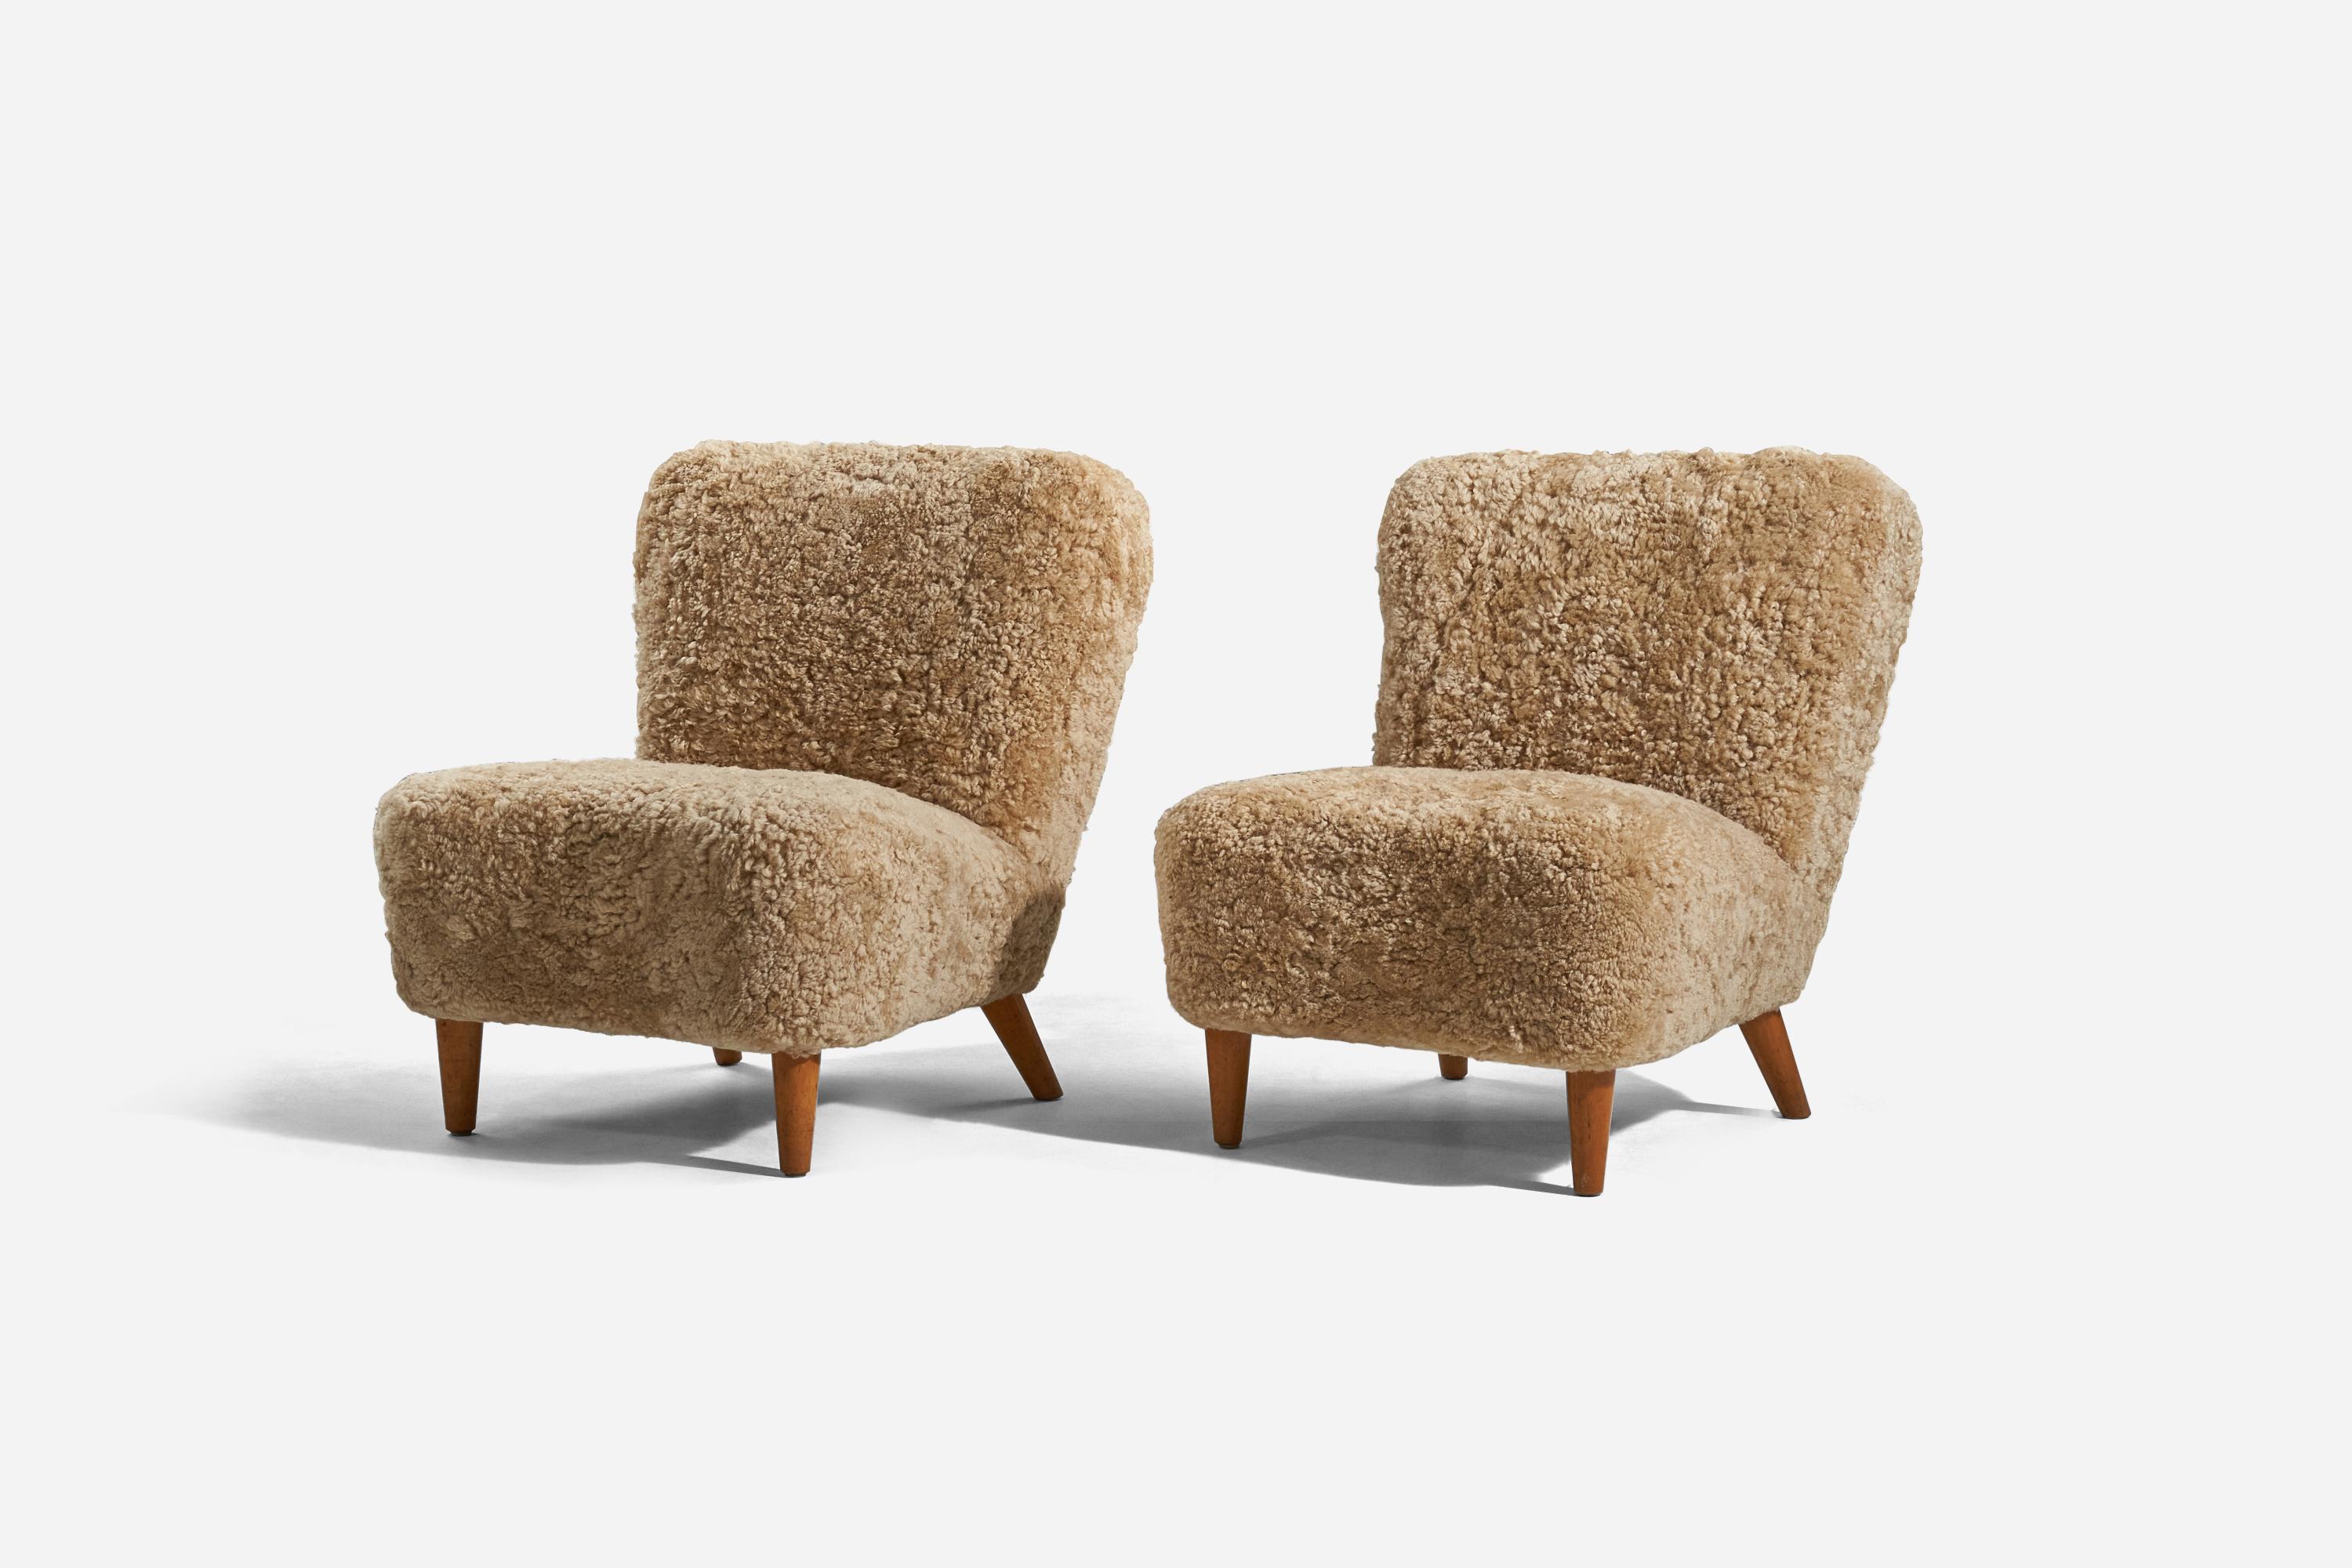 A pair of sheepskin and wood slipper chairs designed and produced in Sweden, 1940s.
 